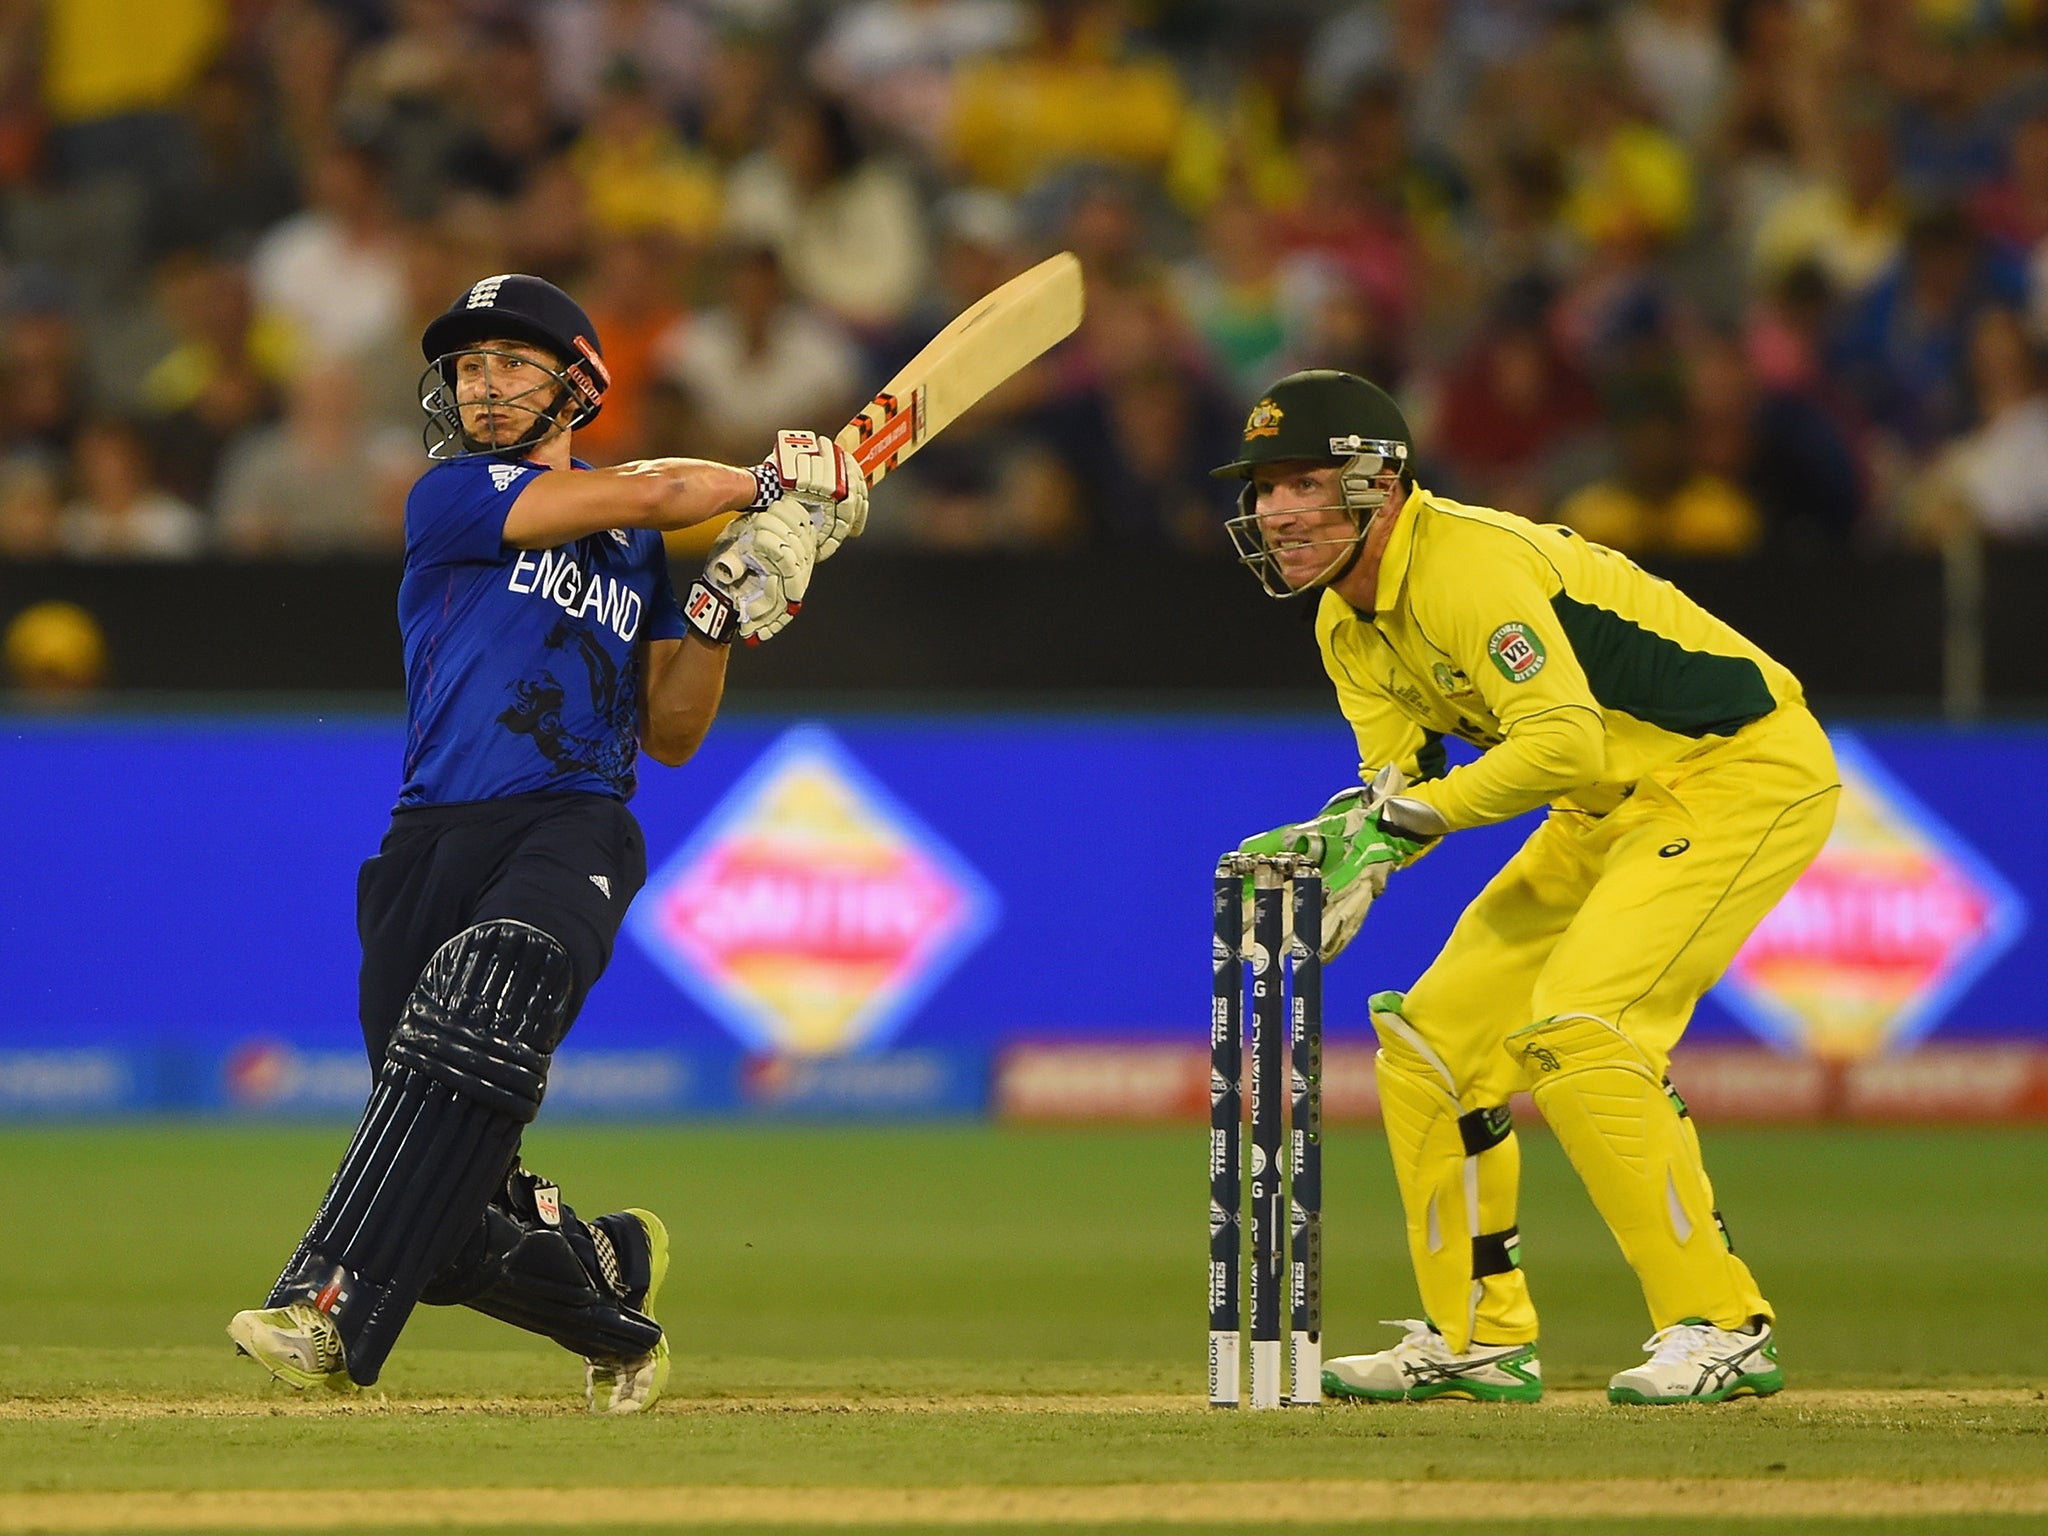 James Taylor in action at the Cricket World Cup